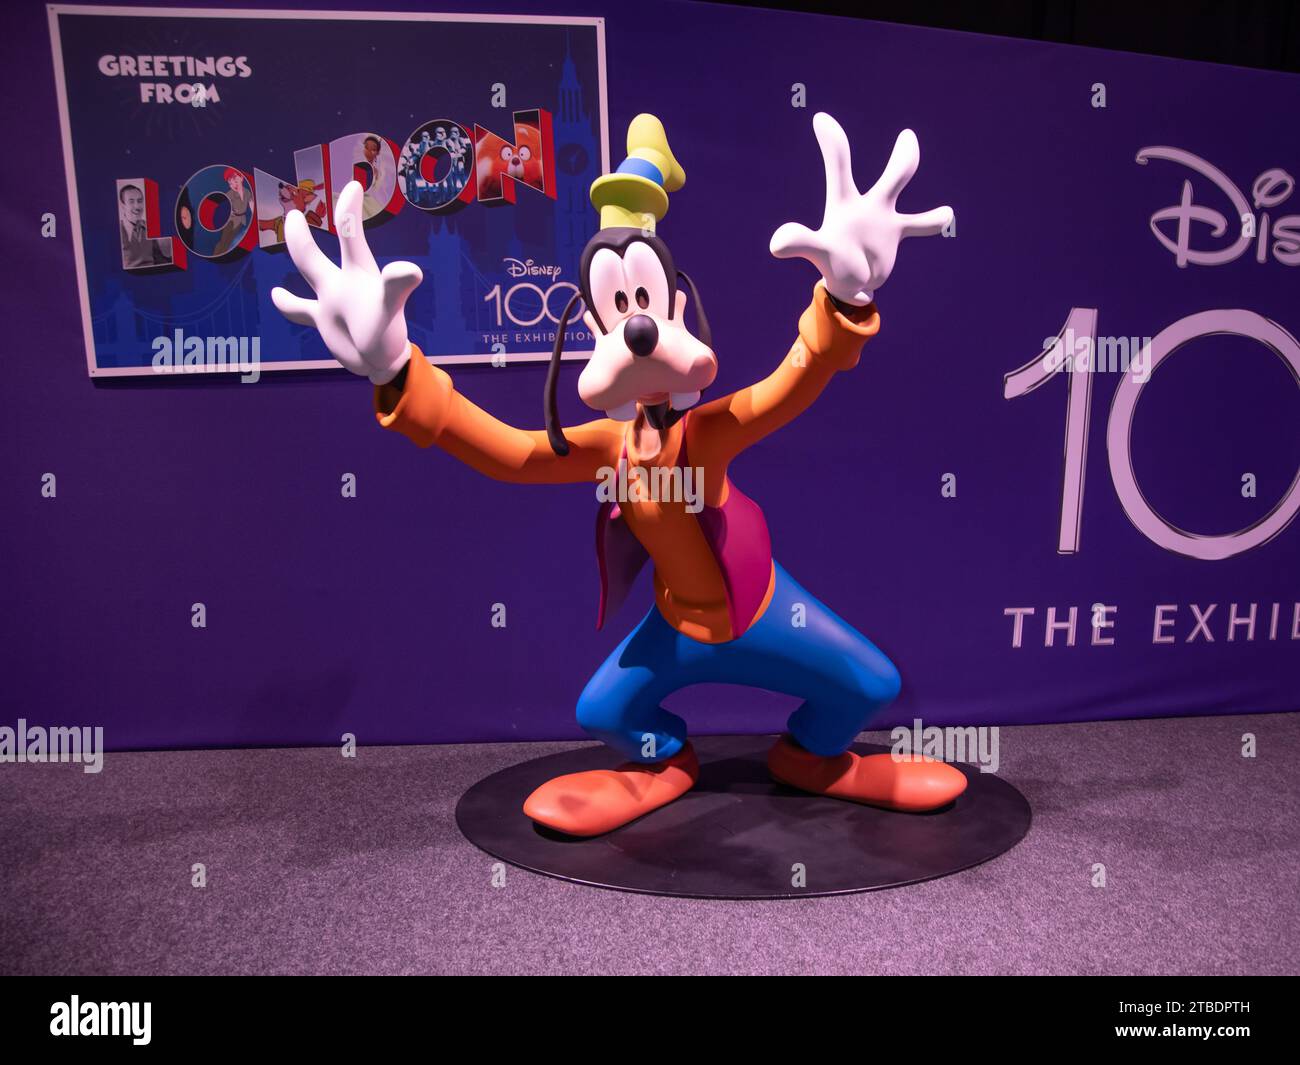 The sculpture of Goofy from Disney in a museum in London, UK Stock Photo